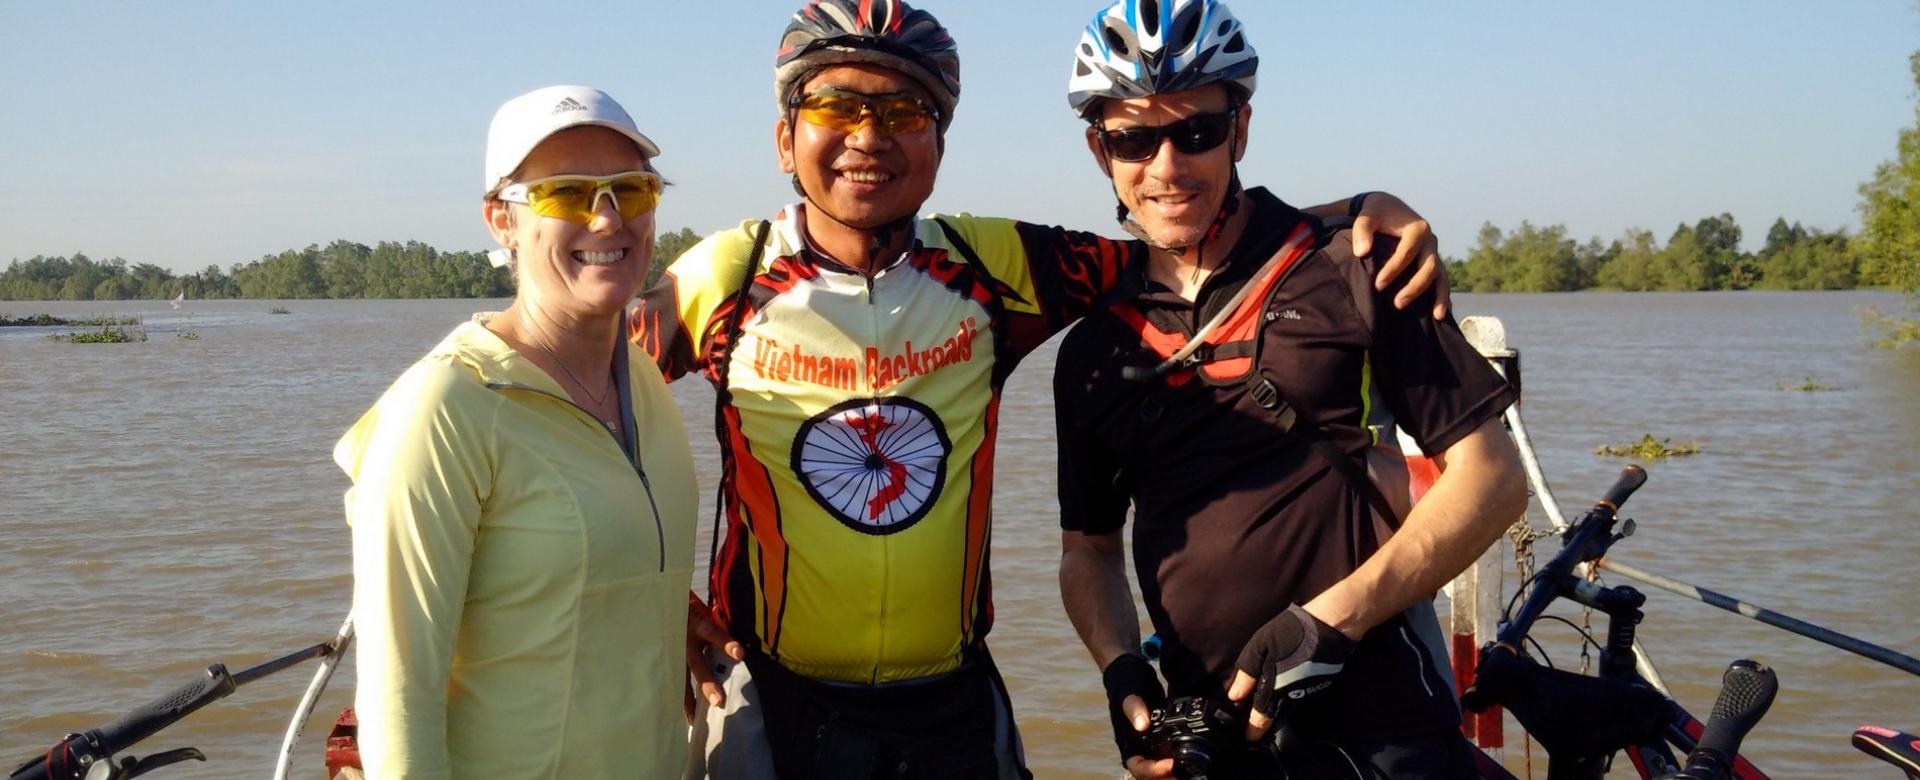 Cycling to Can Tho to Soc Trang, ferry to Con Dao island